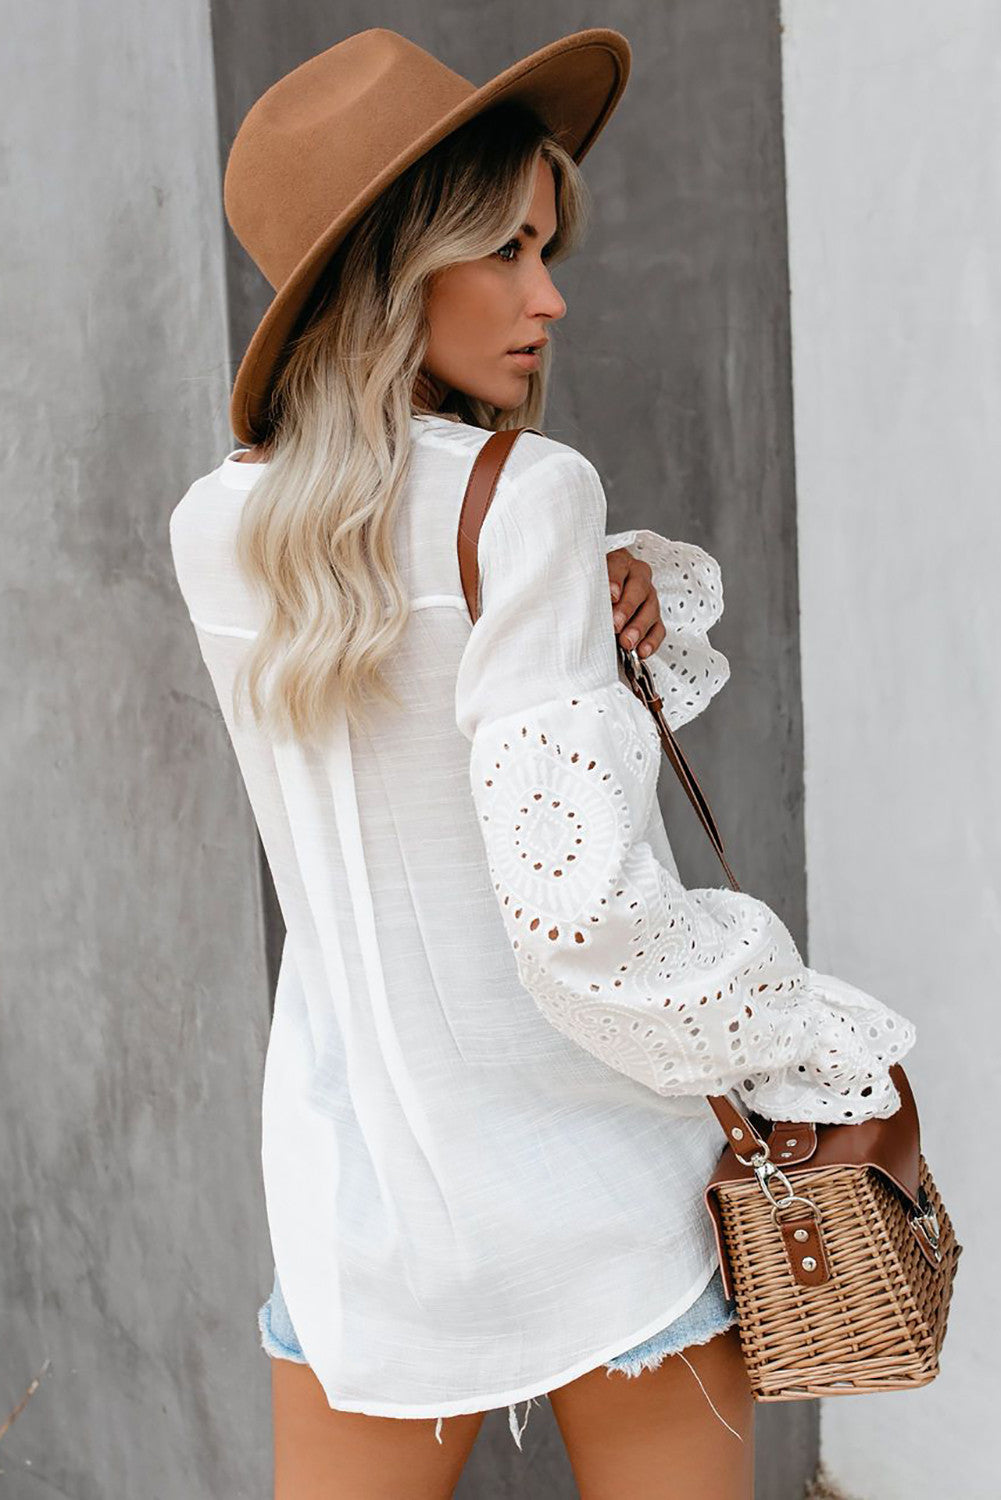 Rekindle Eyelet Button Up Top